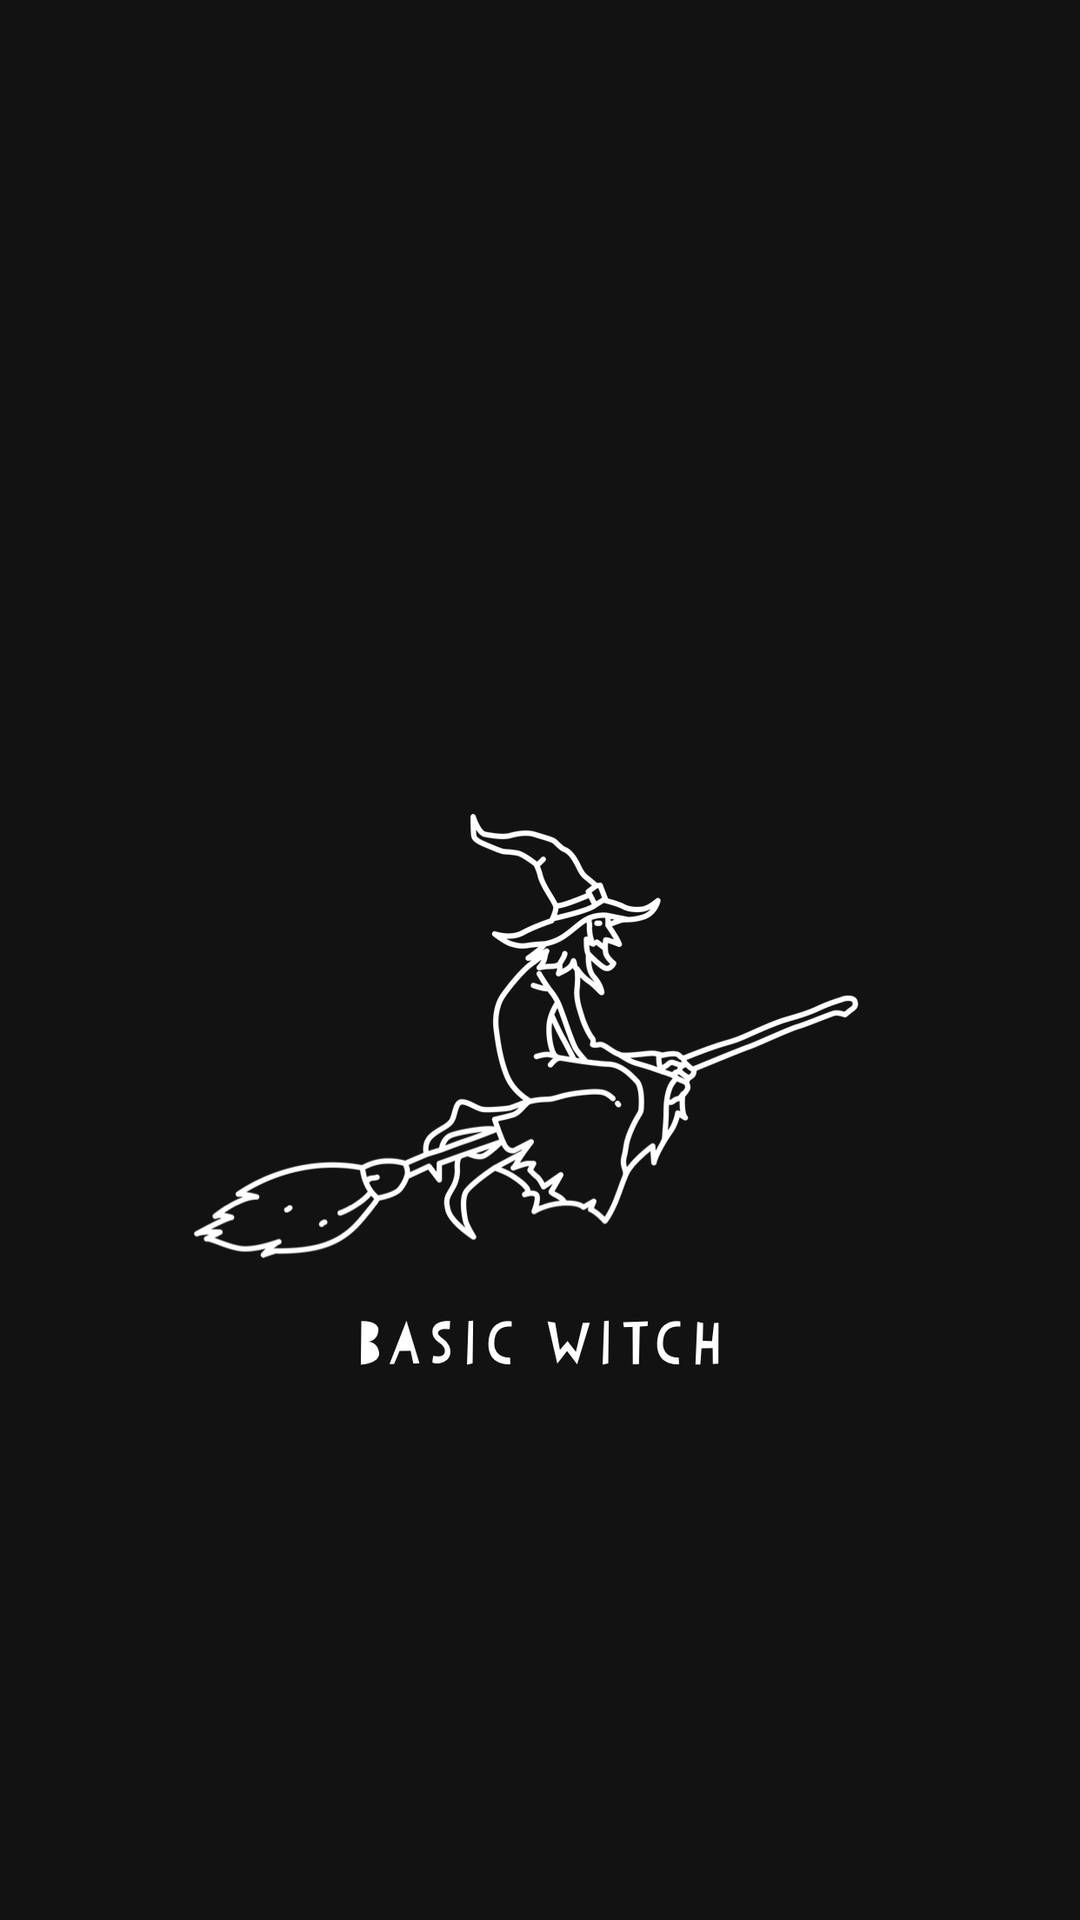 The black and white logo for basic witch - Witch